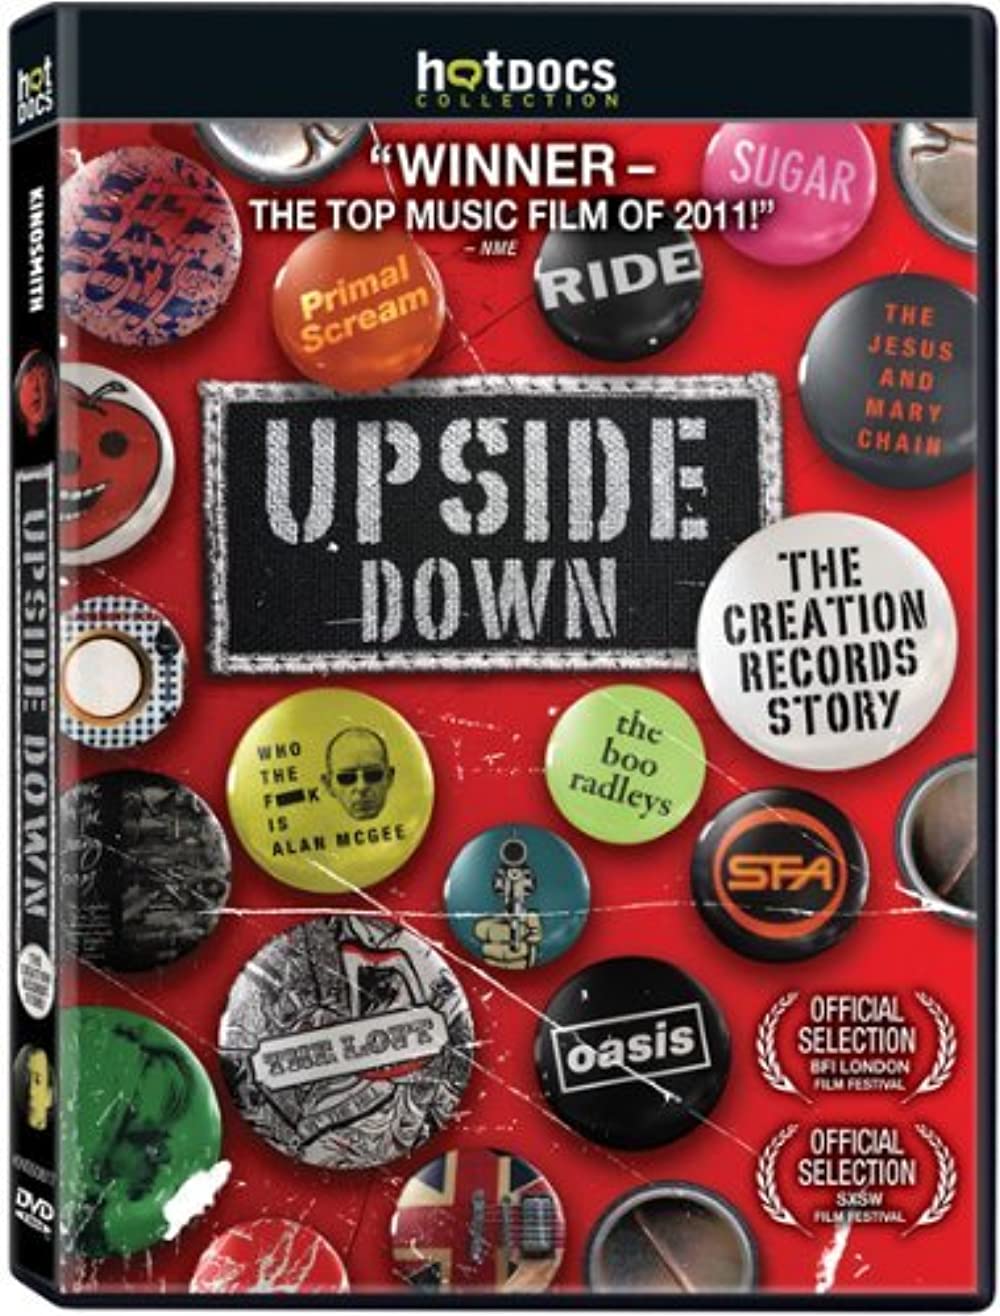 Download Upside Down: The Creation Records Story Movie | Upside Down: The Creation Records Story Movie Review